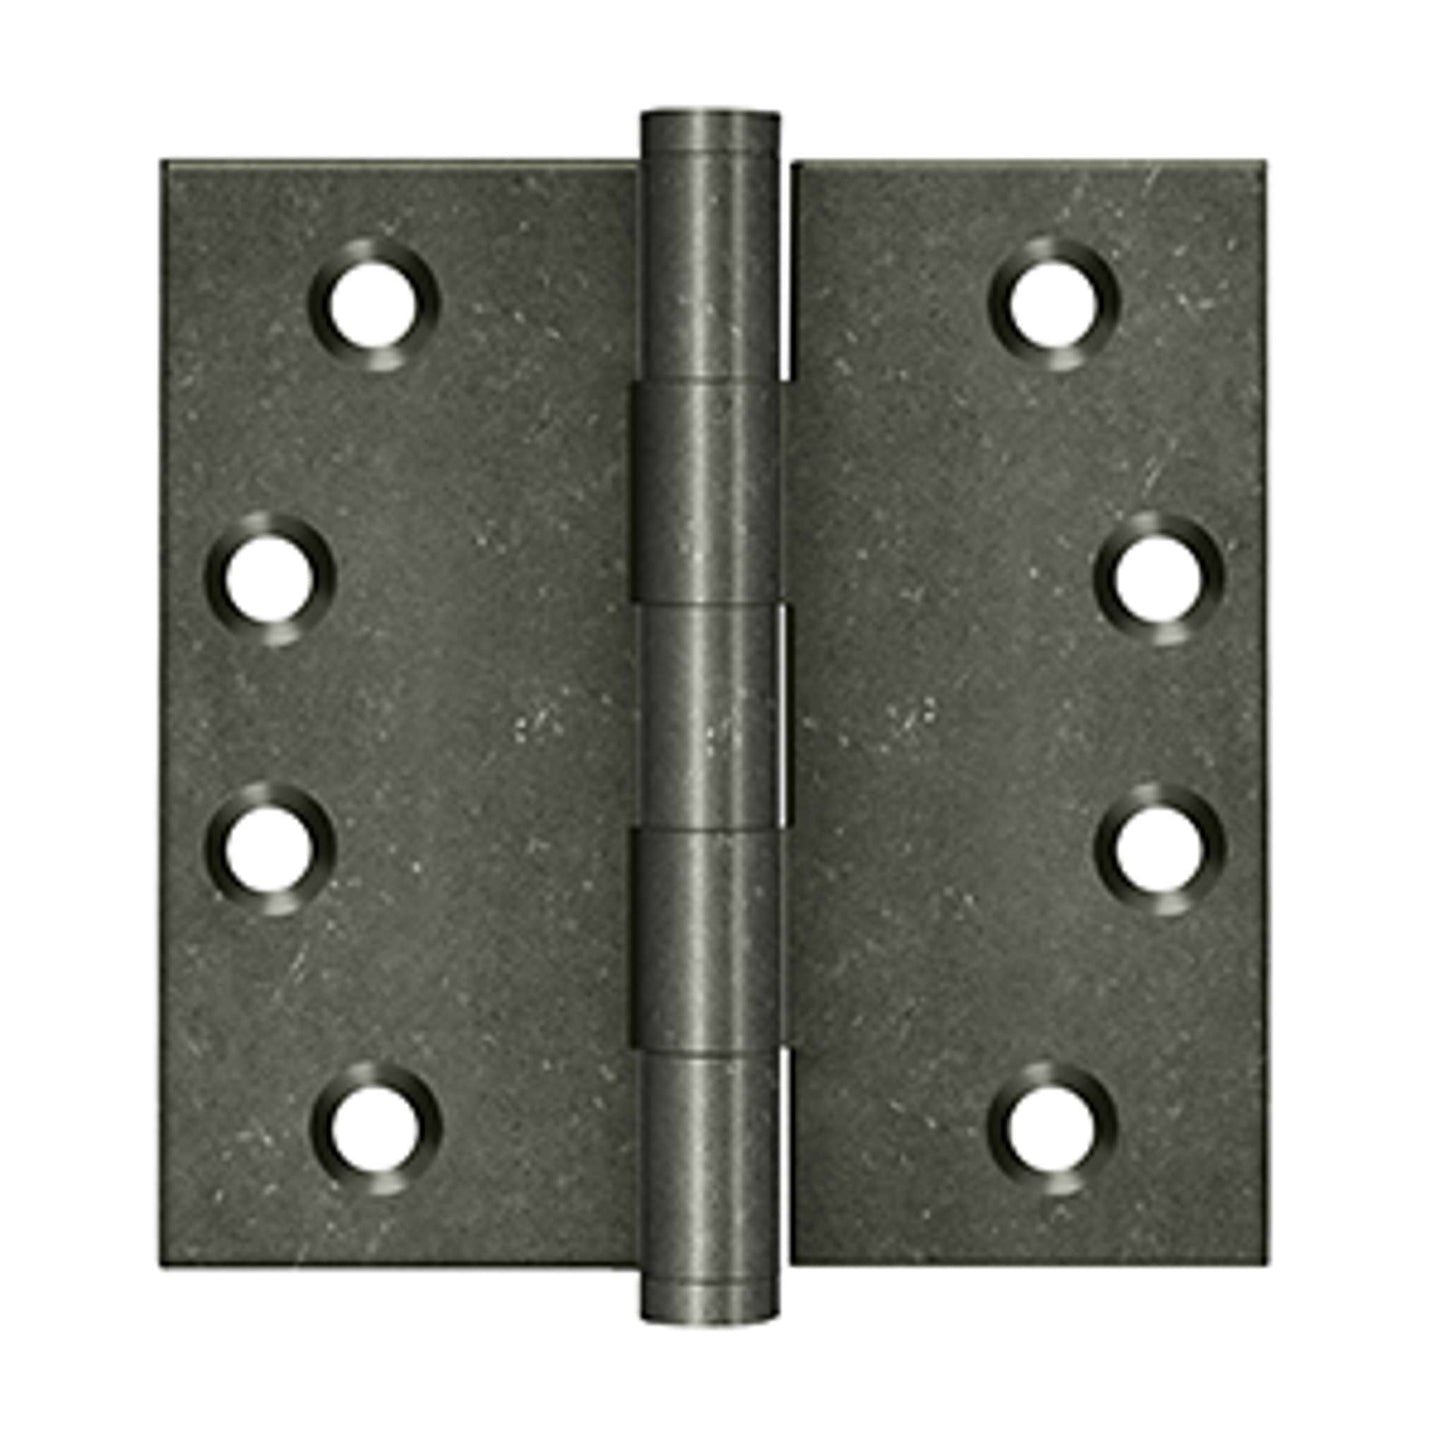 Deltana - 4" x 4" Square Hinges, Distressed Hinges